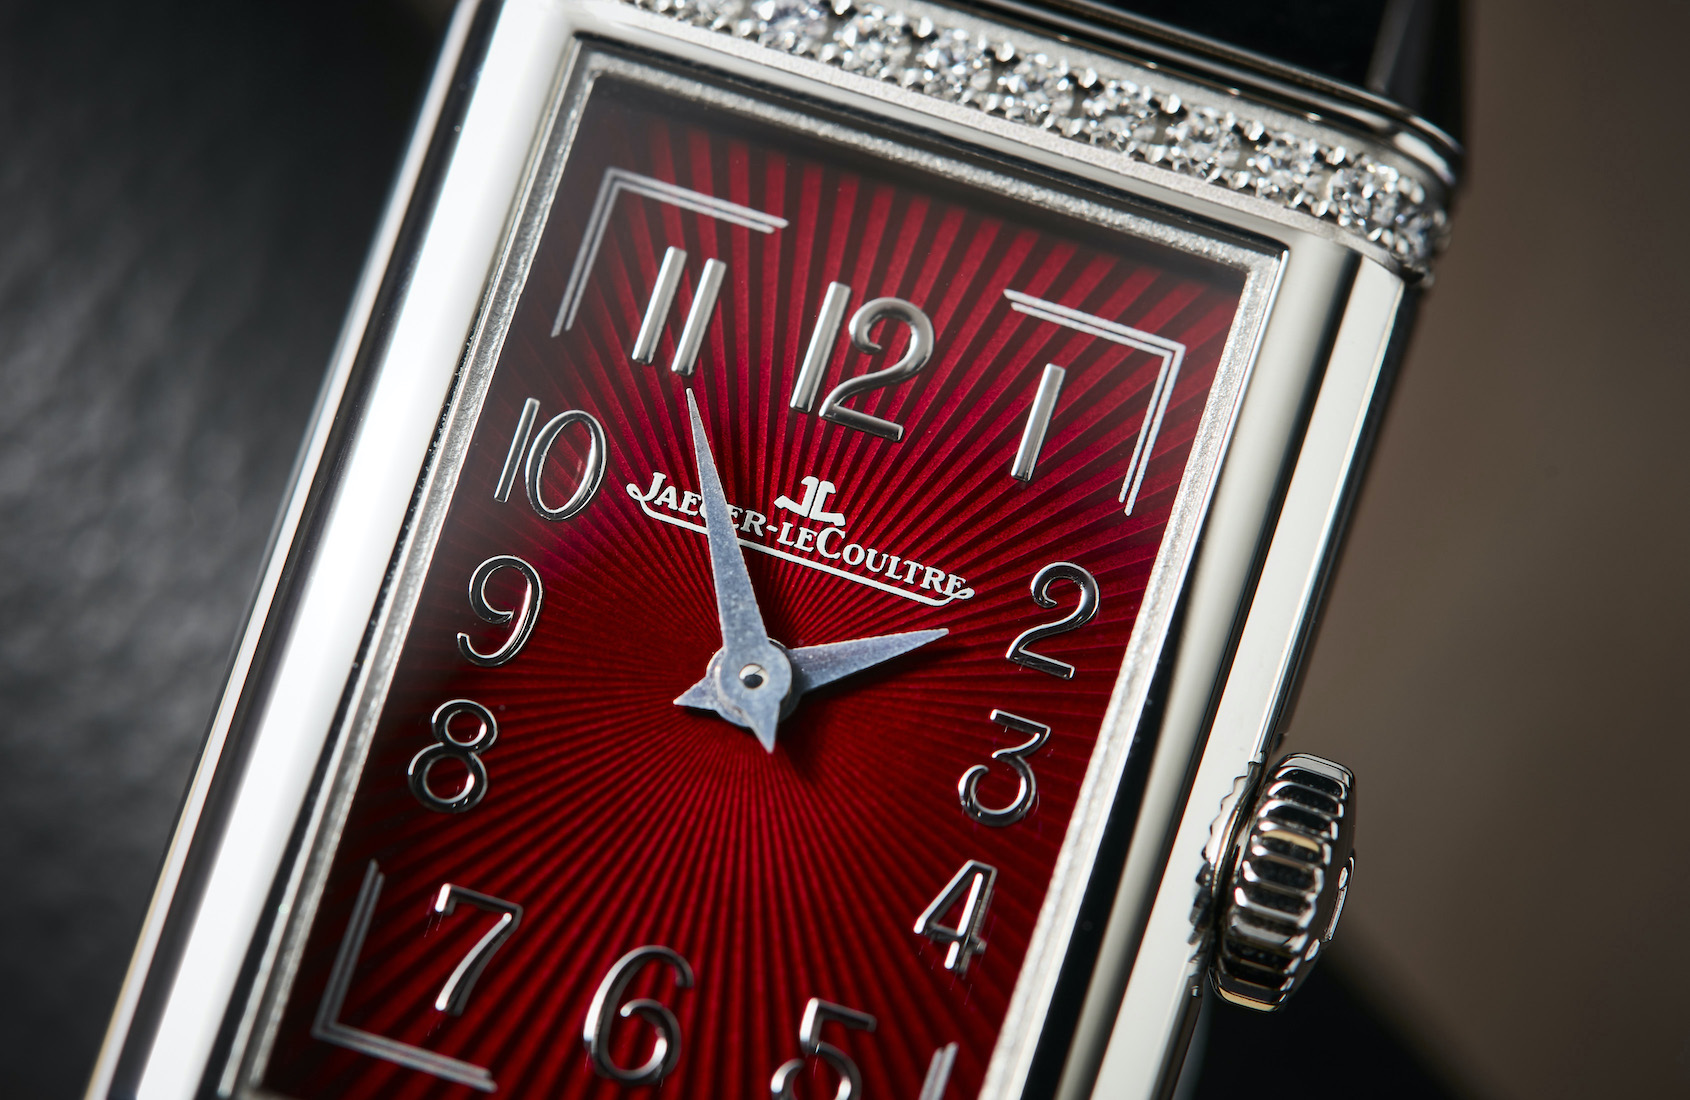 Jaeger-LeCoultre 2020 collection